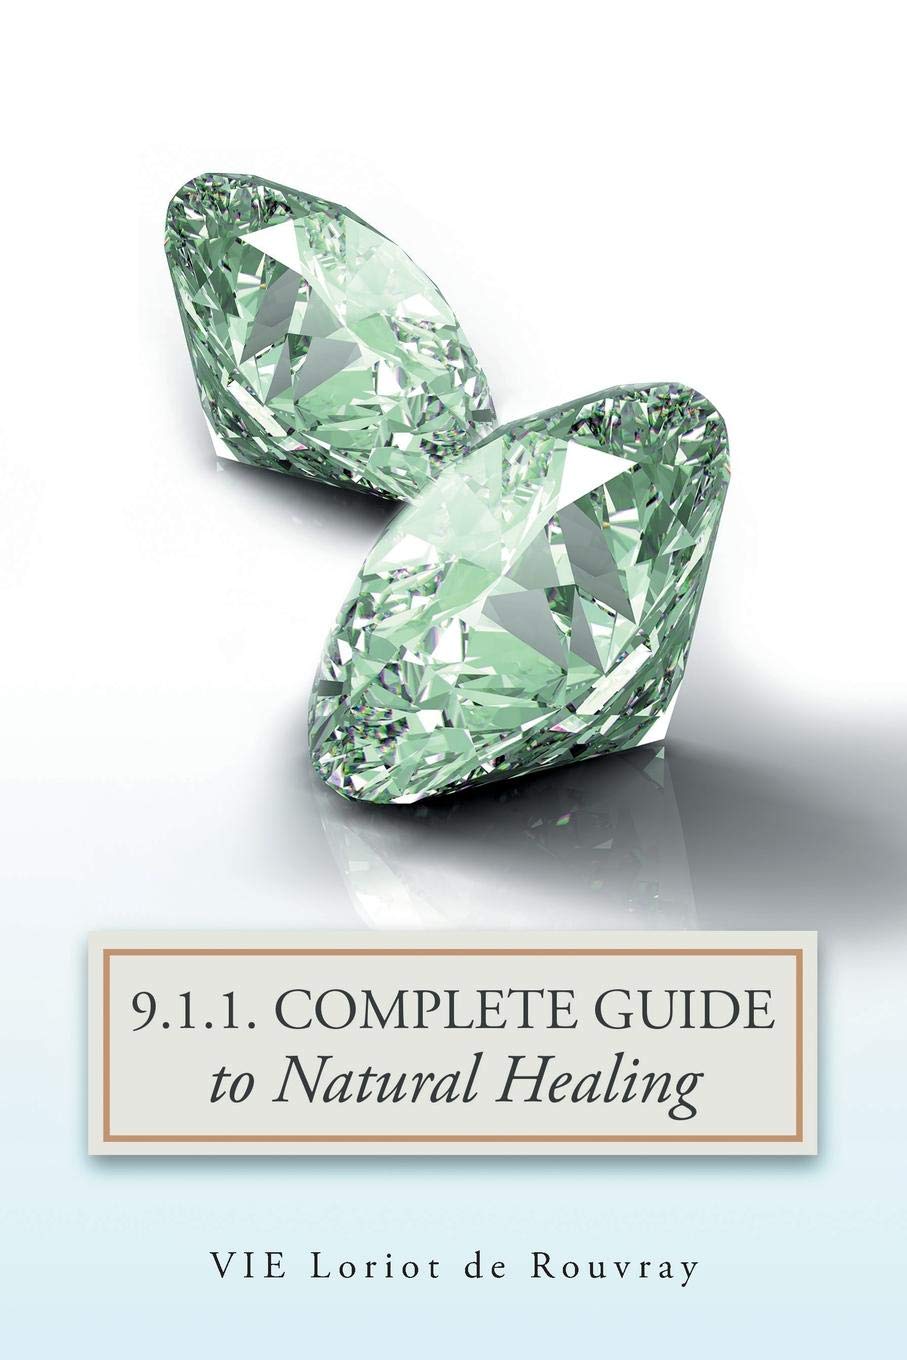 comlete-guide-to-natural-healing